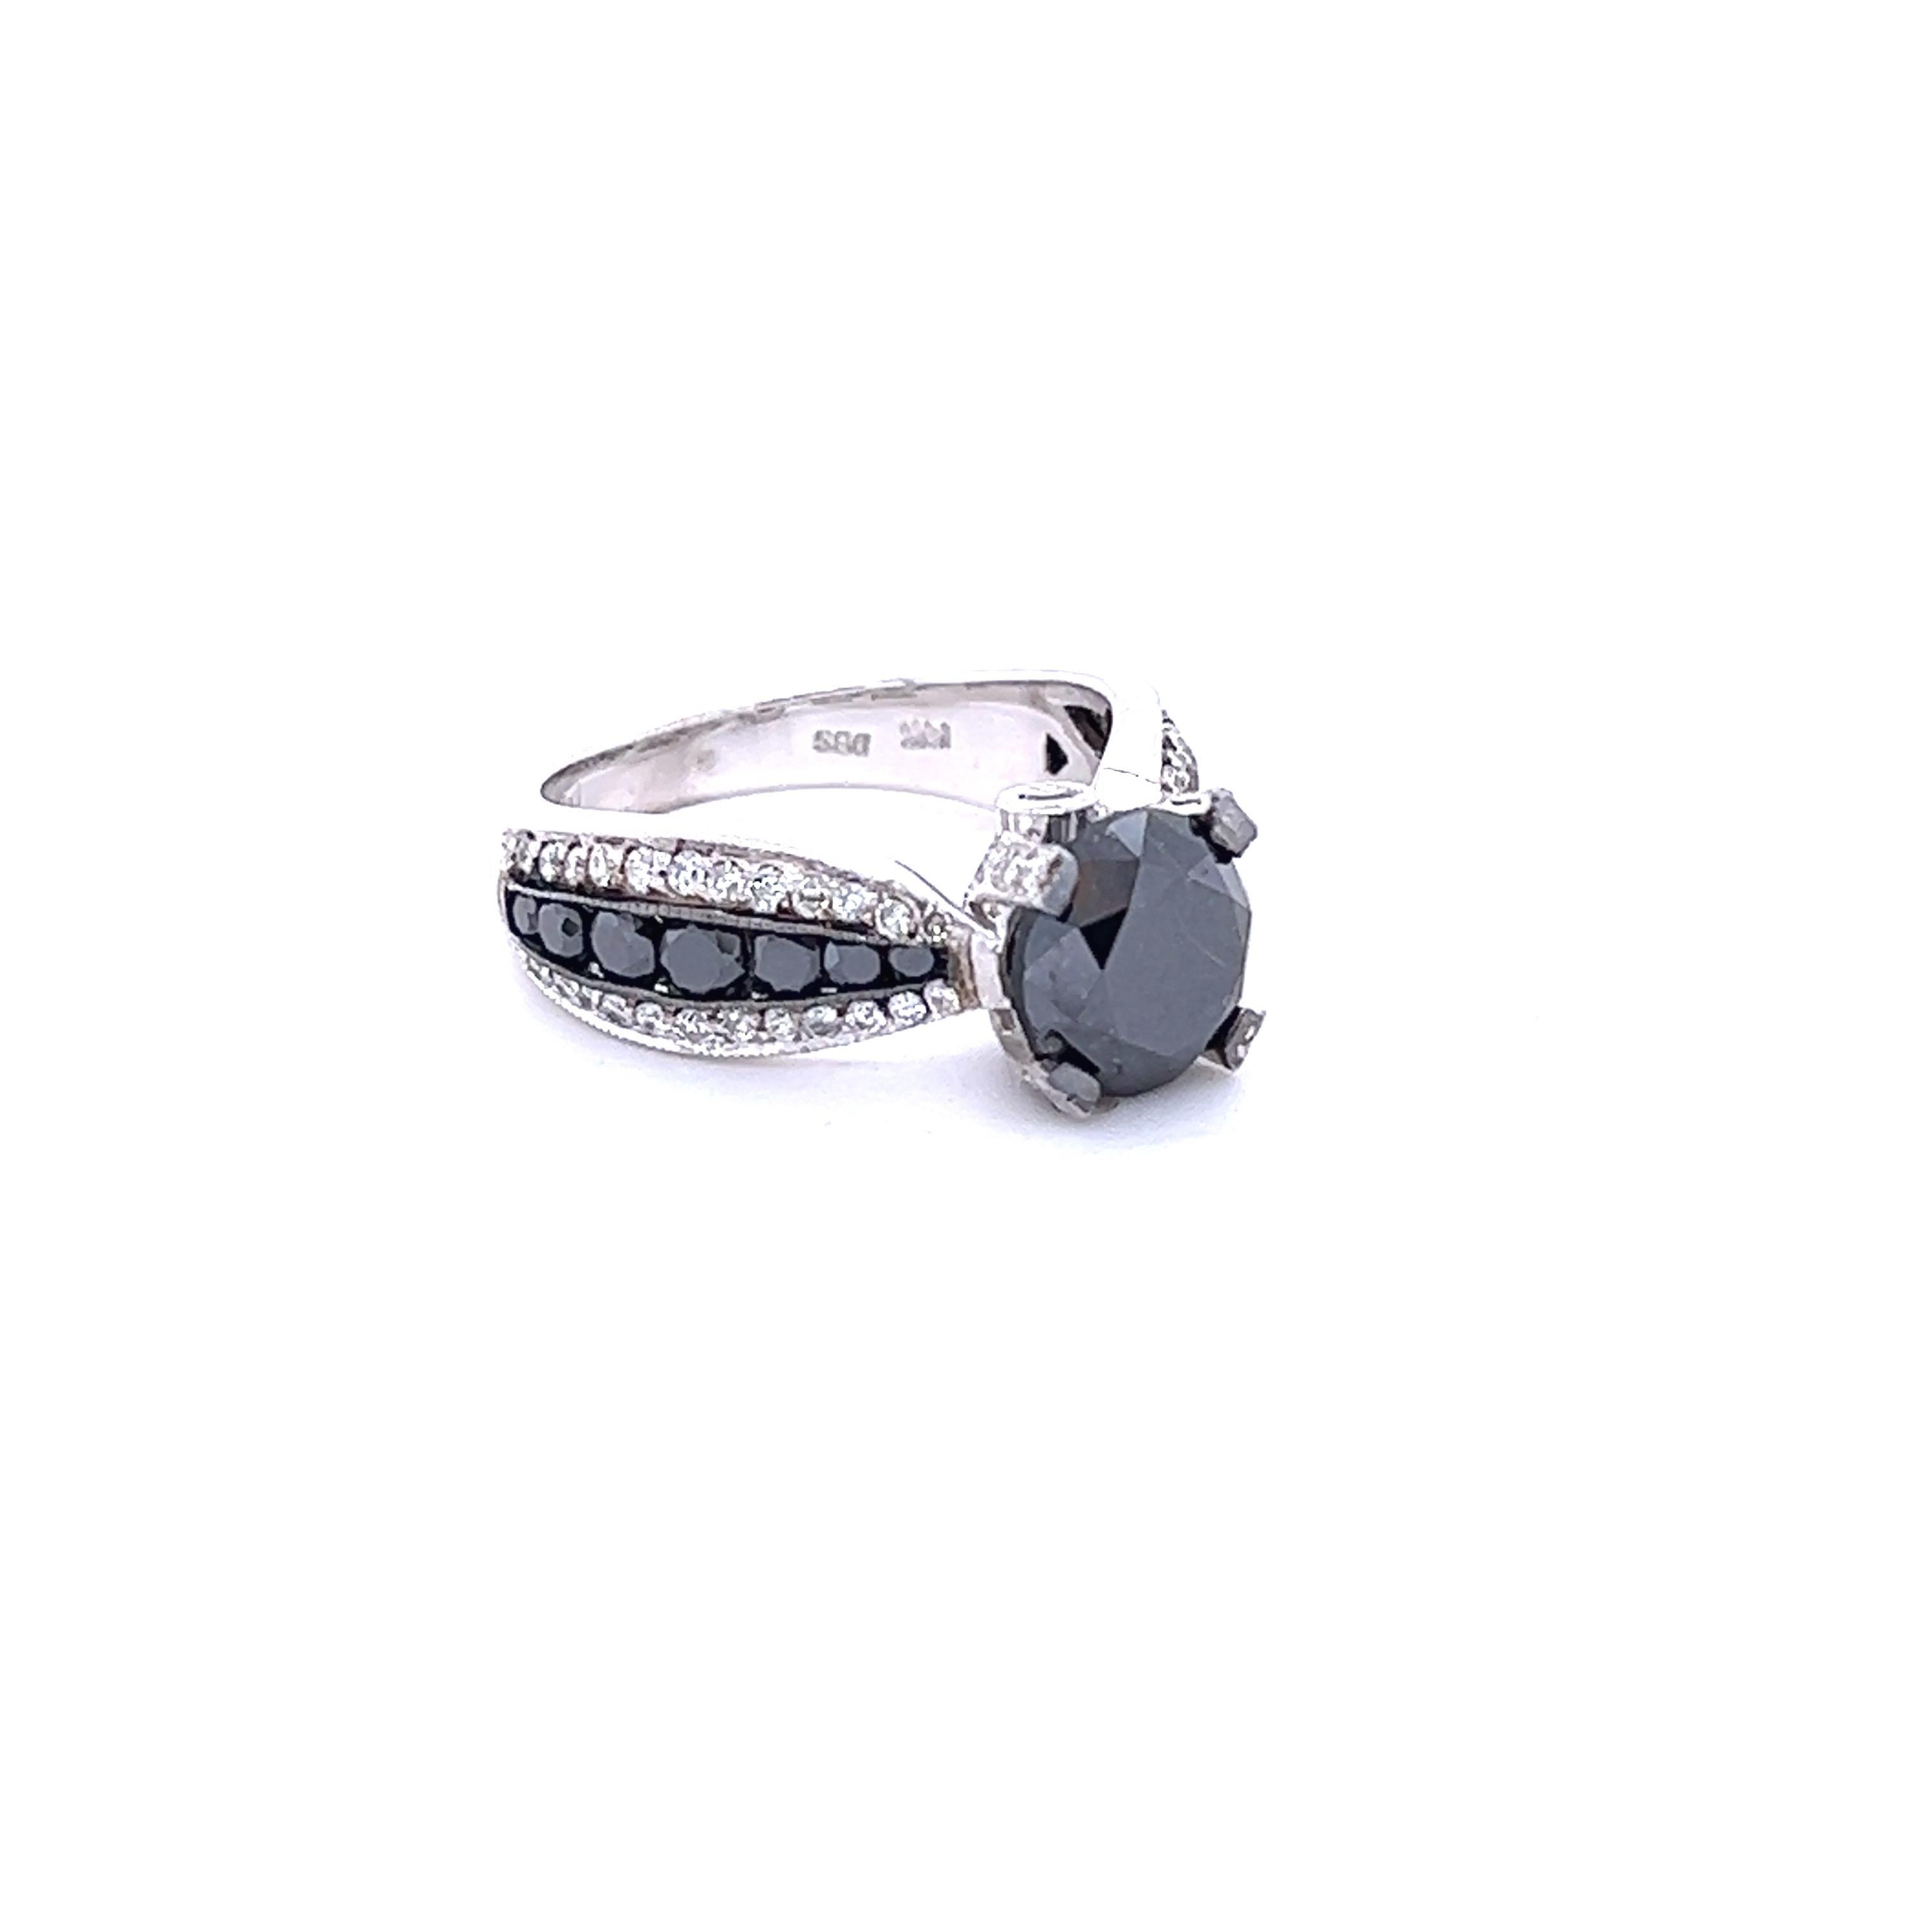 The Round Cut Black Diamond is 2.77 Carats and measures at approximately 8 mm. The setting has 14 Black Round Cut Diamonds weighing 0.71 Carats and 66 Round Cut Diamonds that weigh 0.52 Carats. (Clarity: SI, Color: F) The total carat weight of the